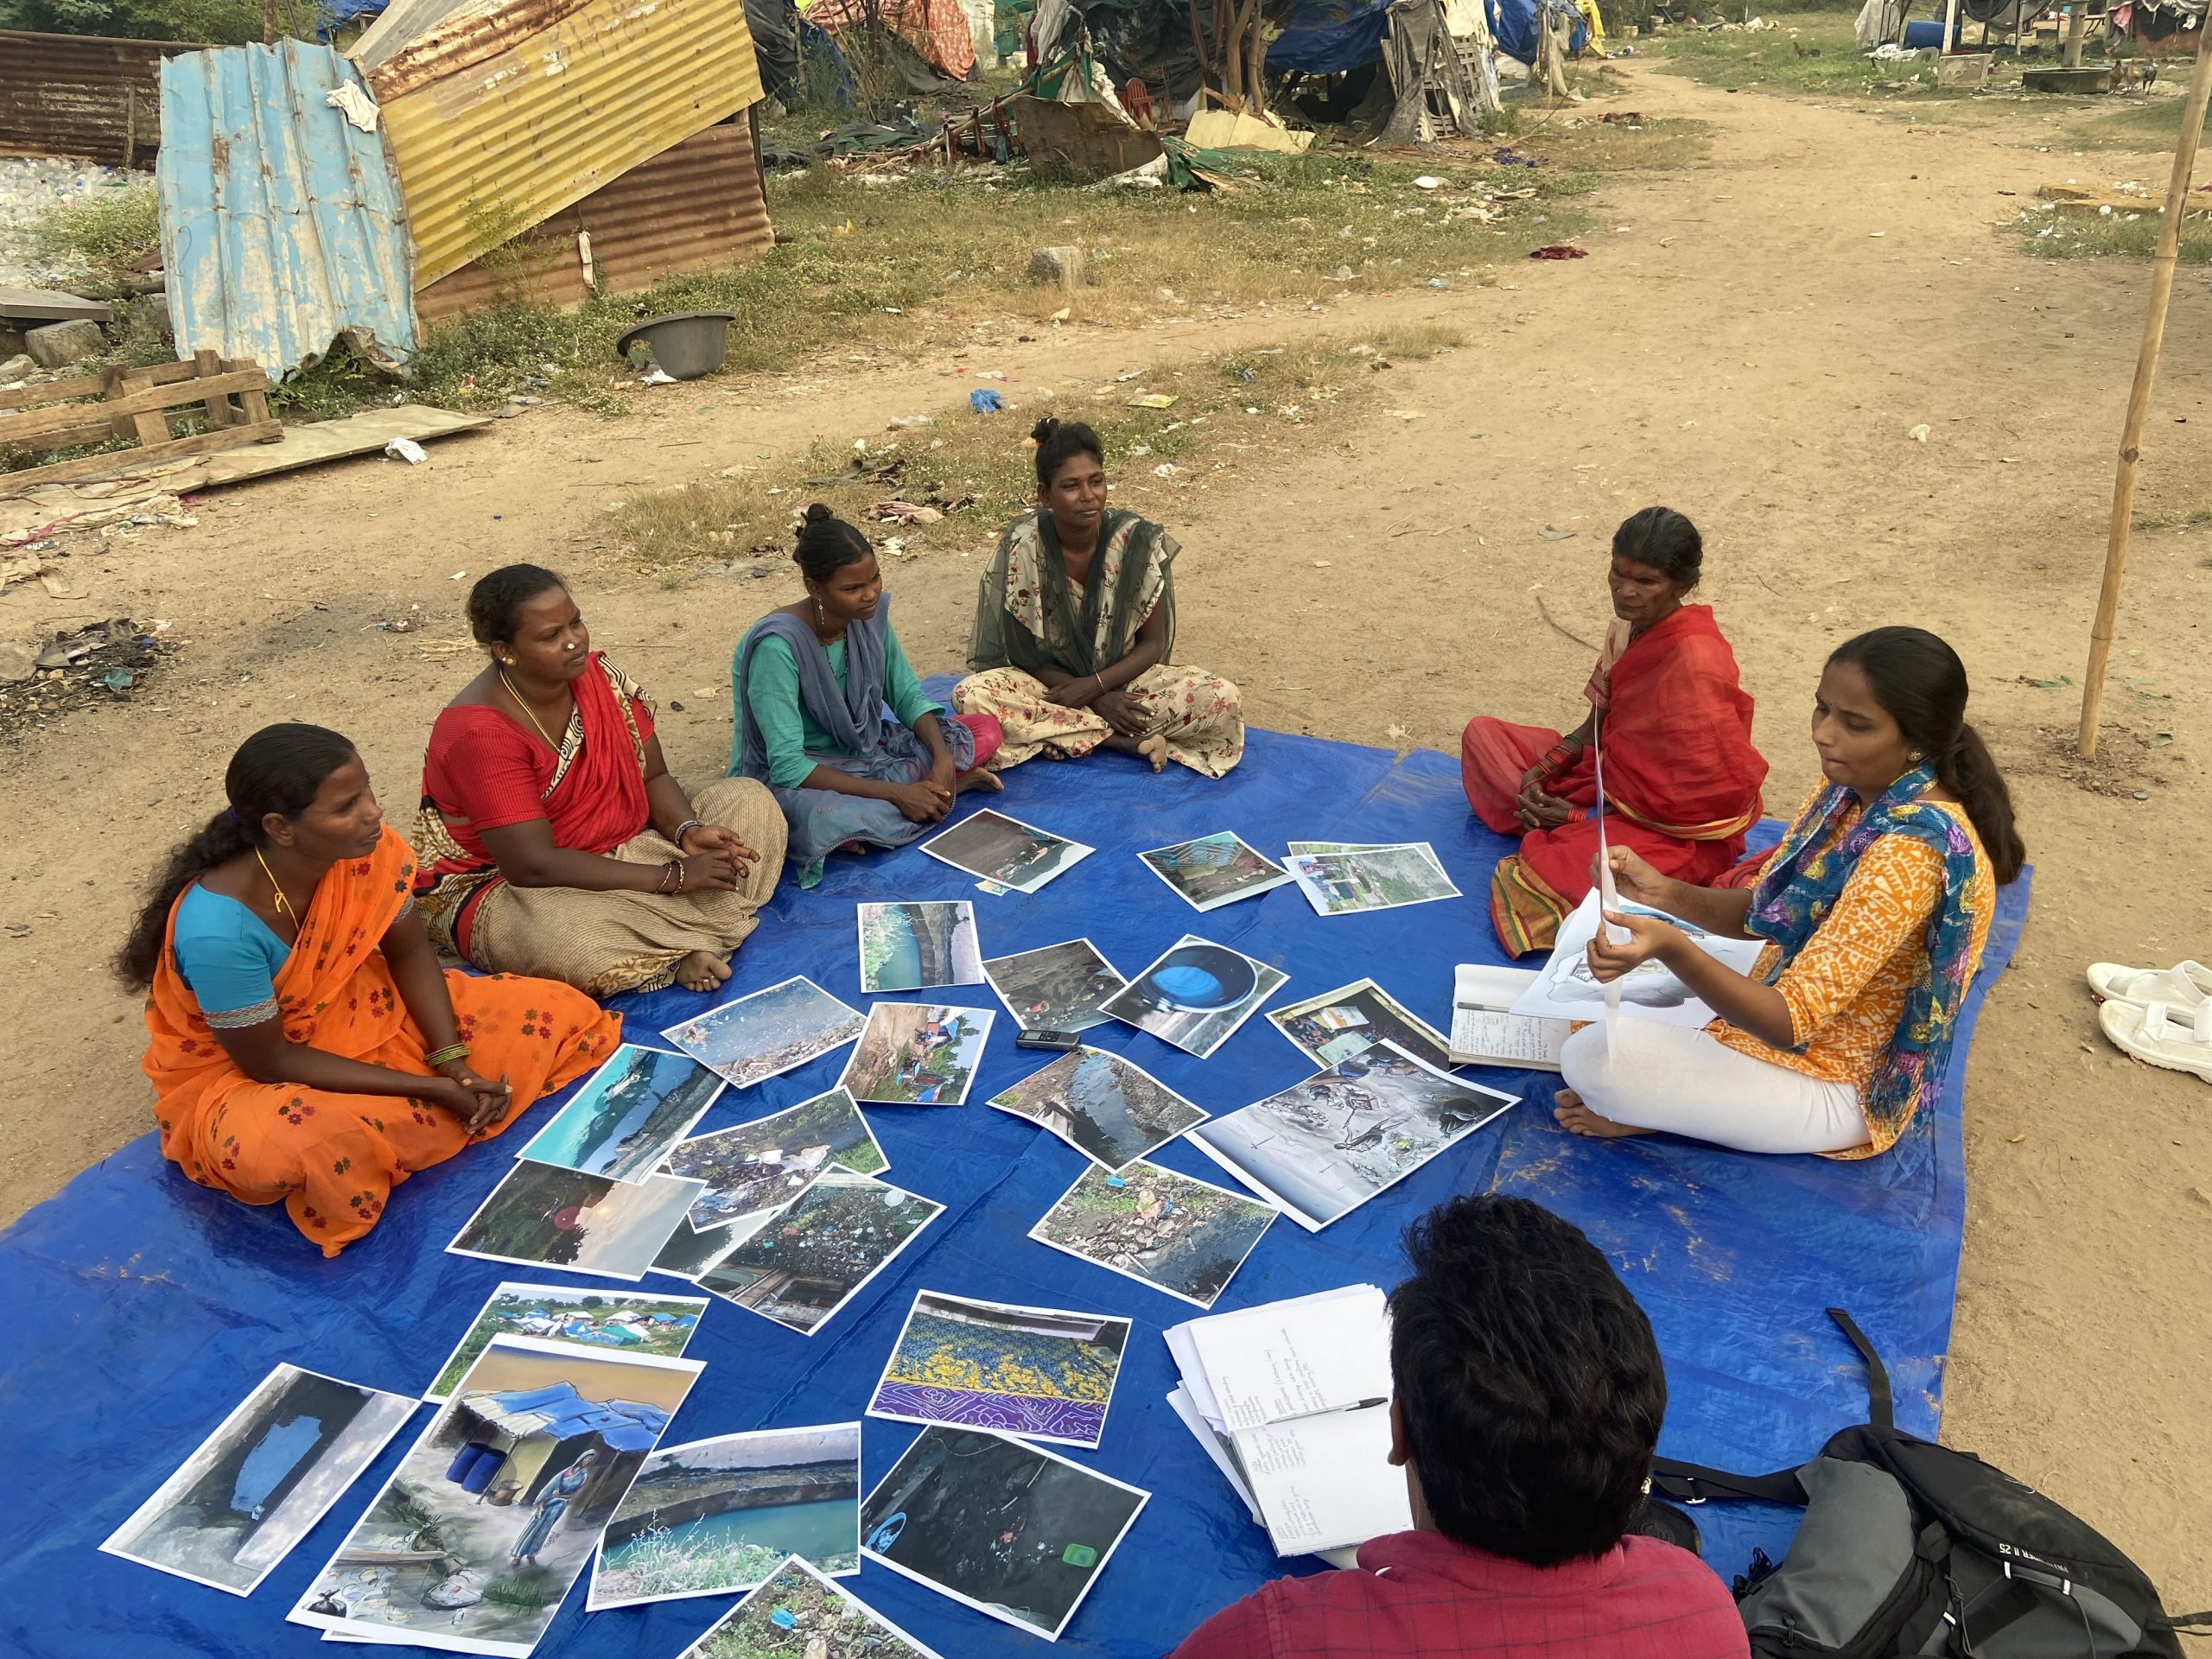 Women in India discussing the photos that they have taken